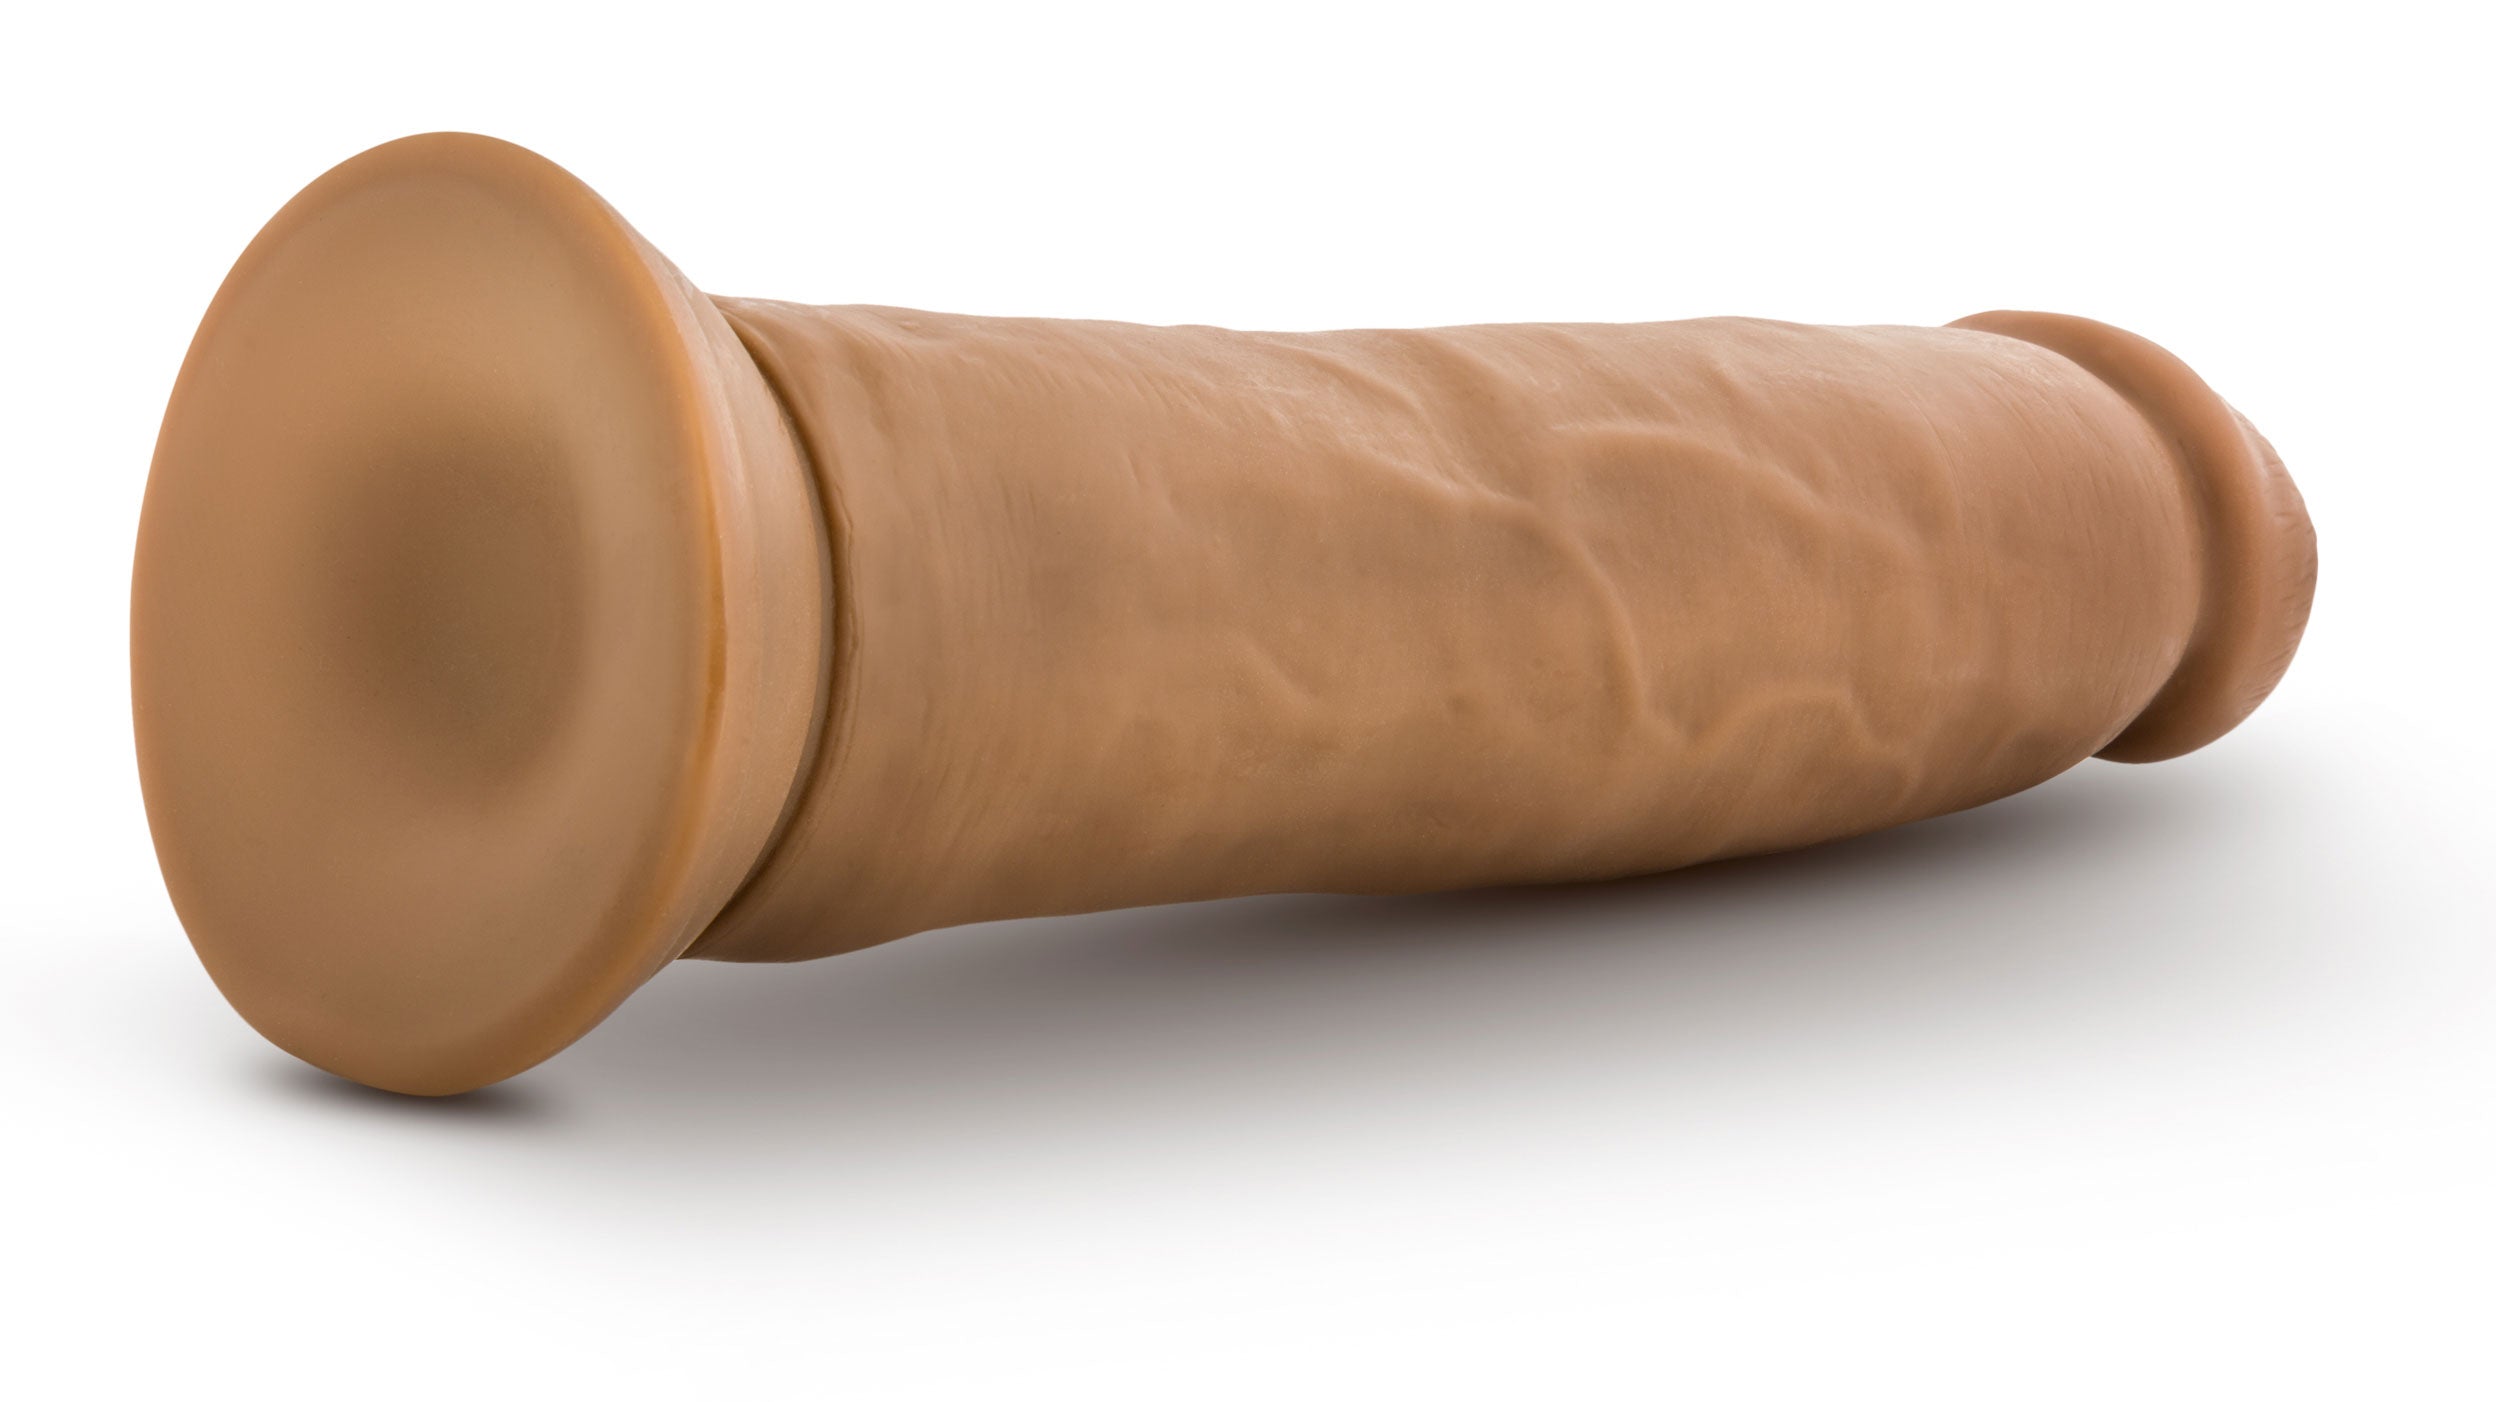 Dr. Skin Silicone - Dr. Henry - 9 Inch Dildo With Suction Cup